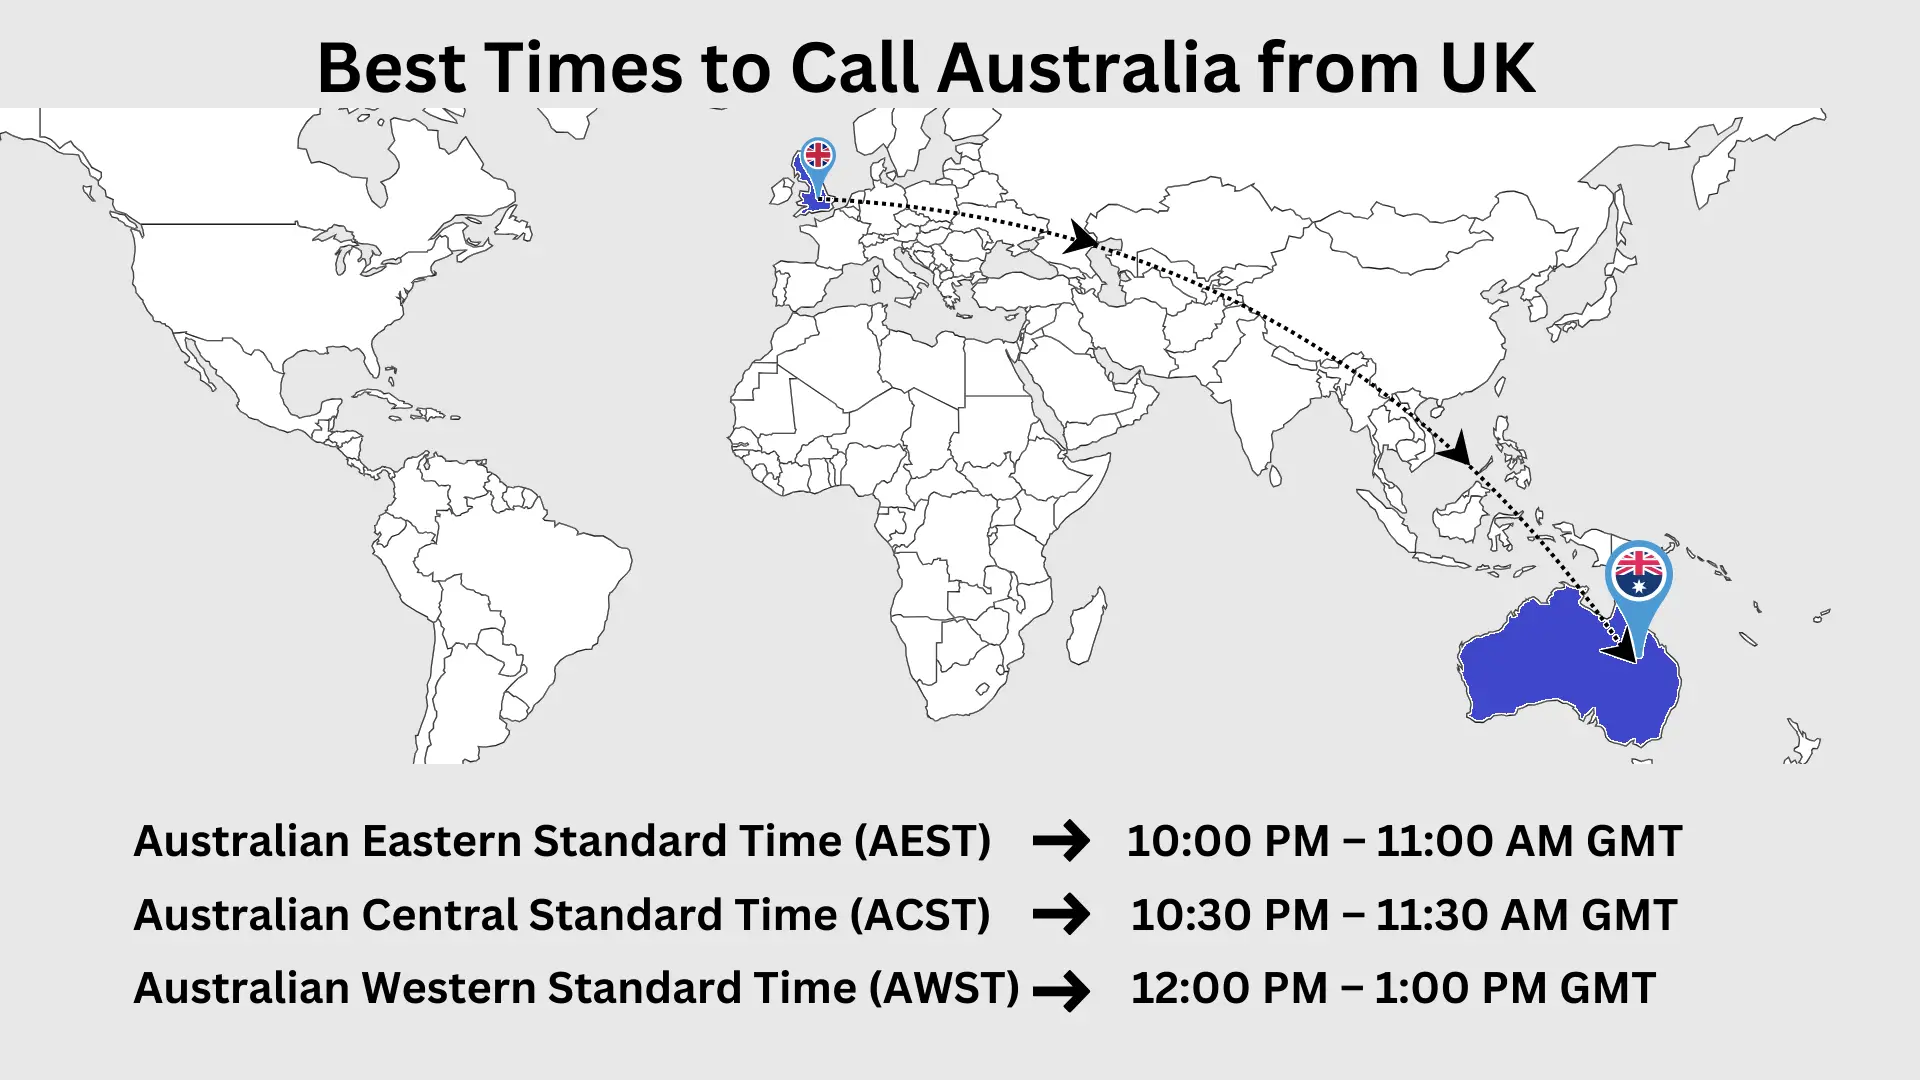 time zone to call from uk to australia